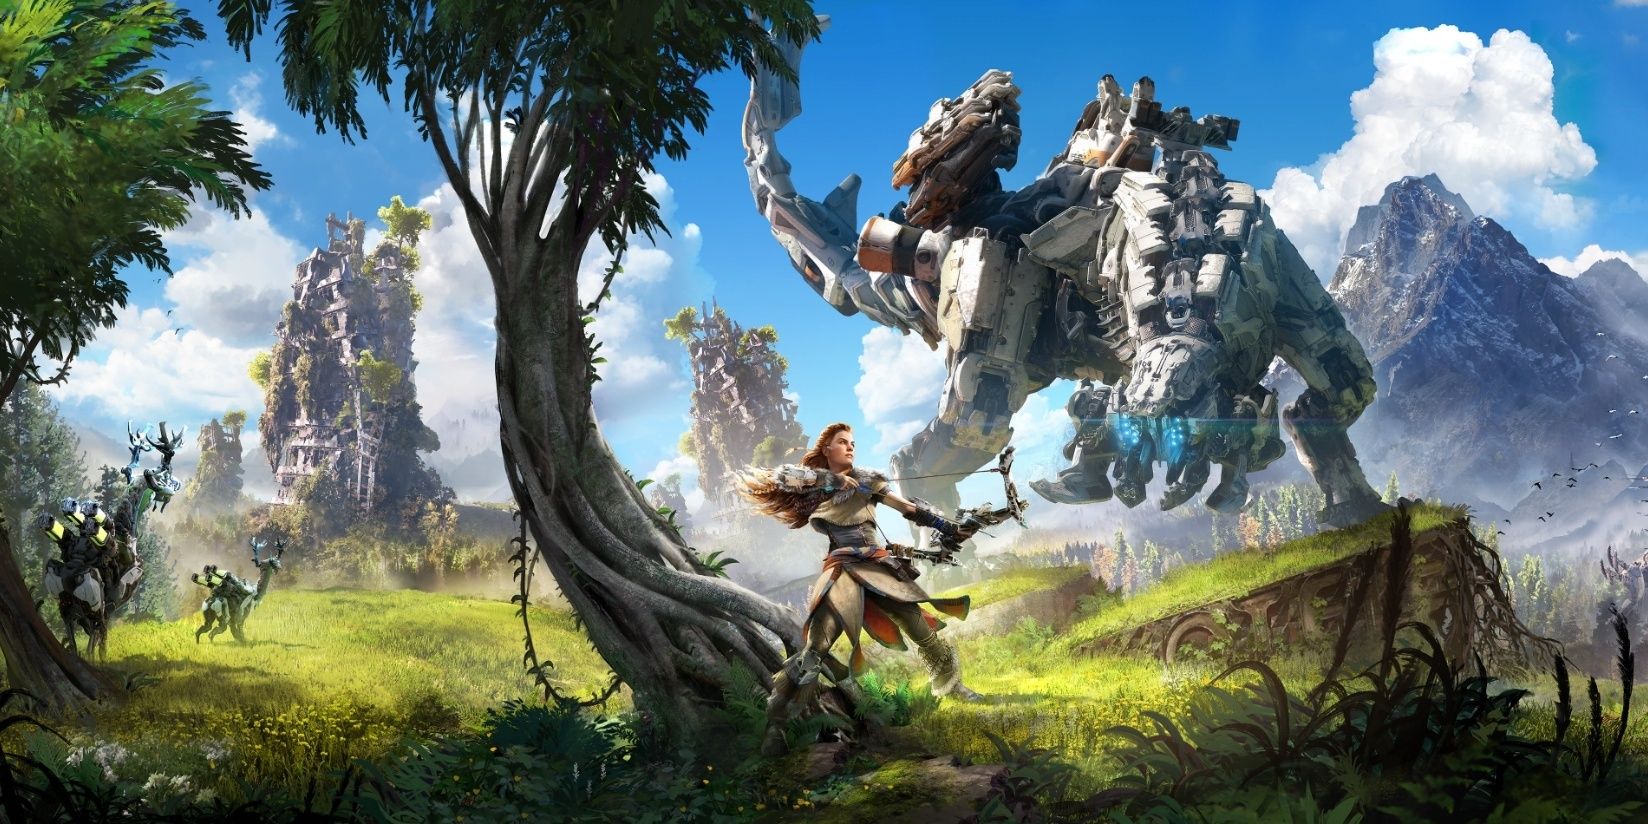 Aloy surrounded by machines in the cover art of Horizon Zero Dawn